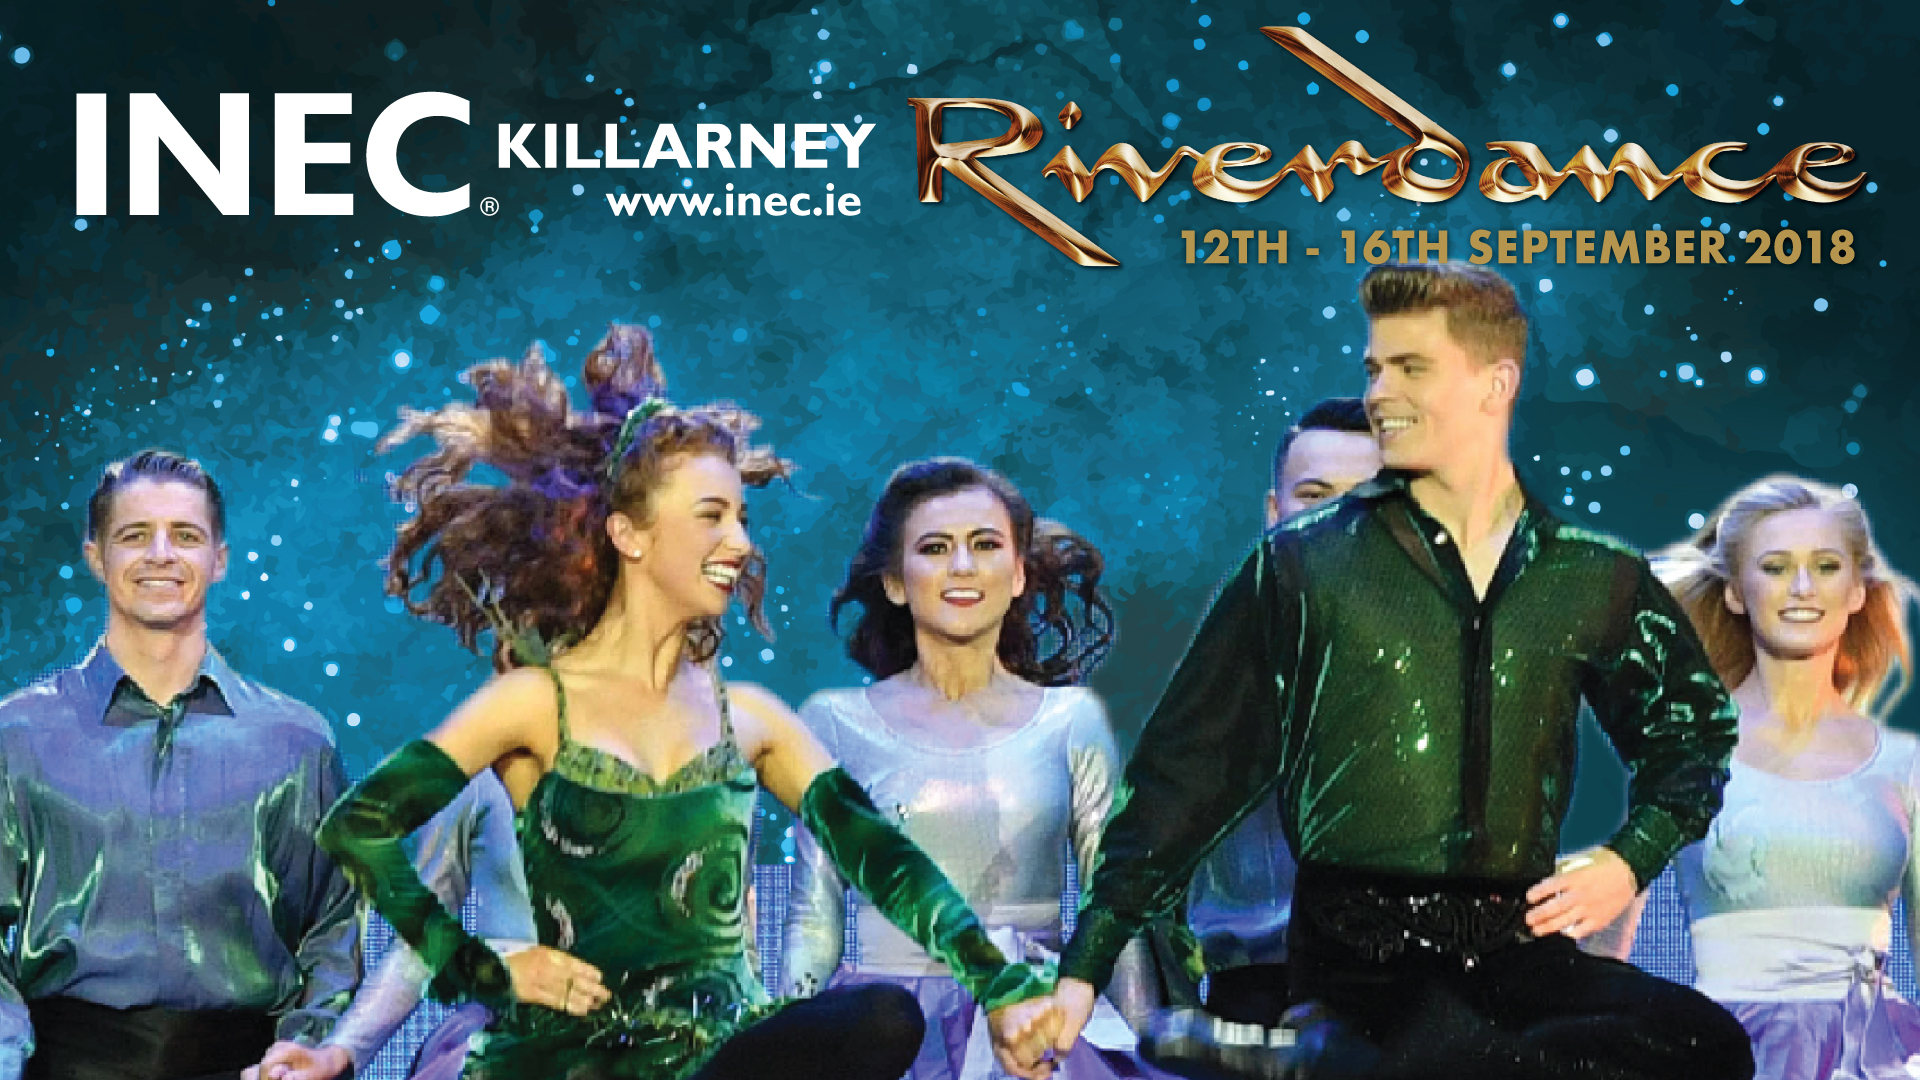 Become a Riverdance VIP this summer at the INEC Killarney Sept 12 -16